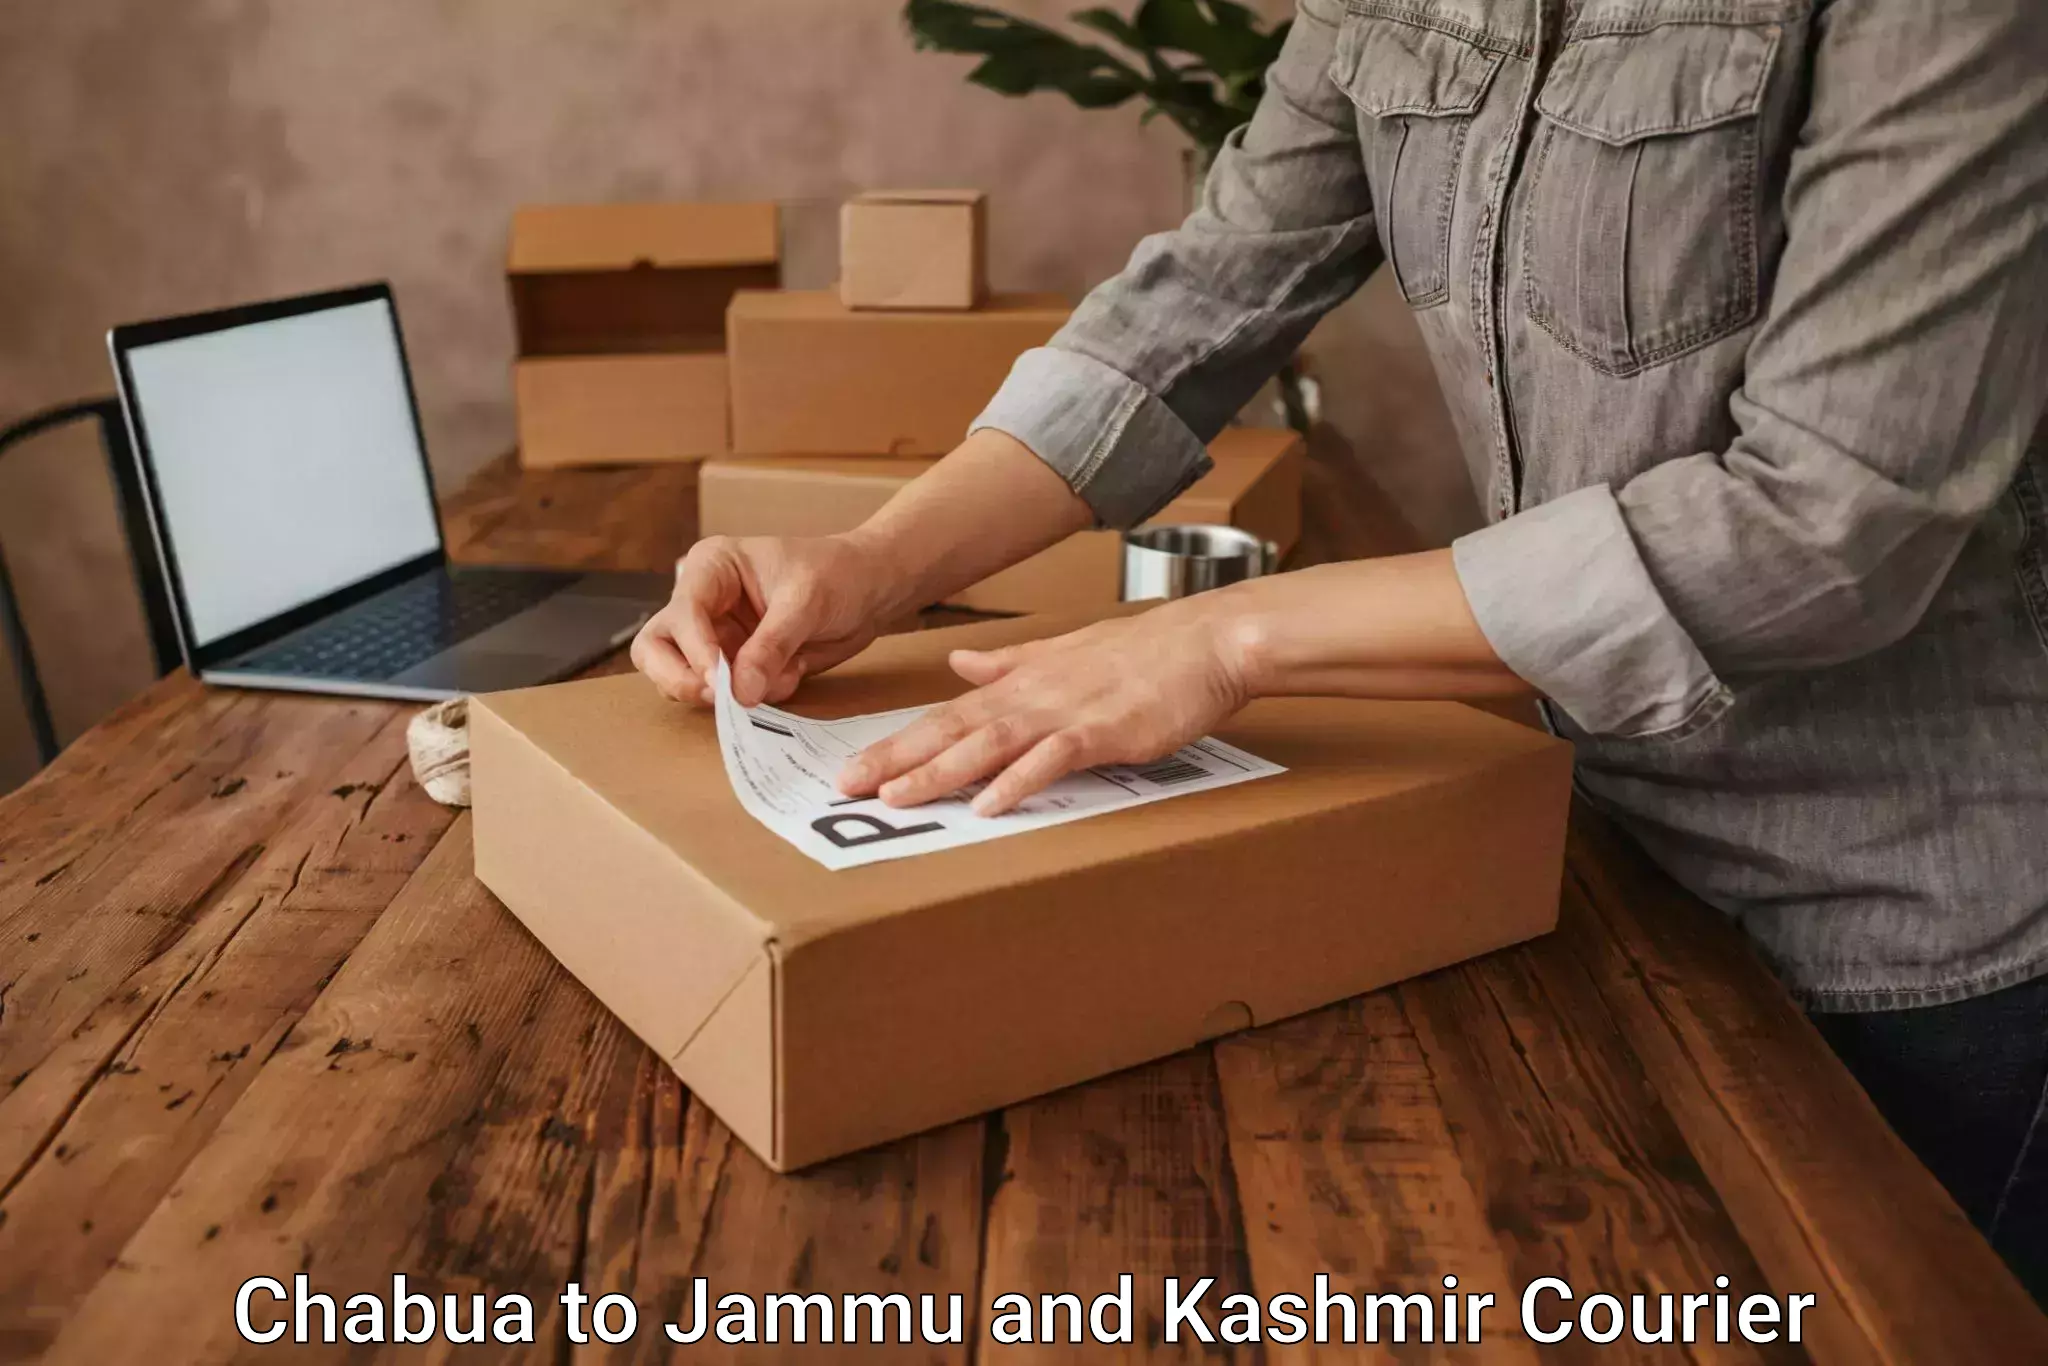 Multi-national courier services Chabua to Jammu and Kashmir